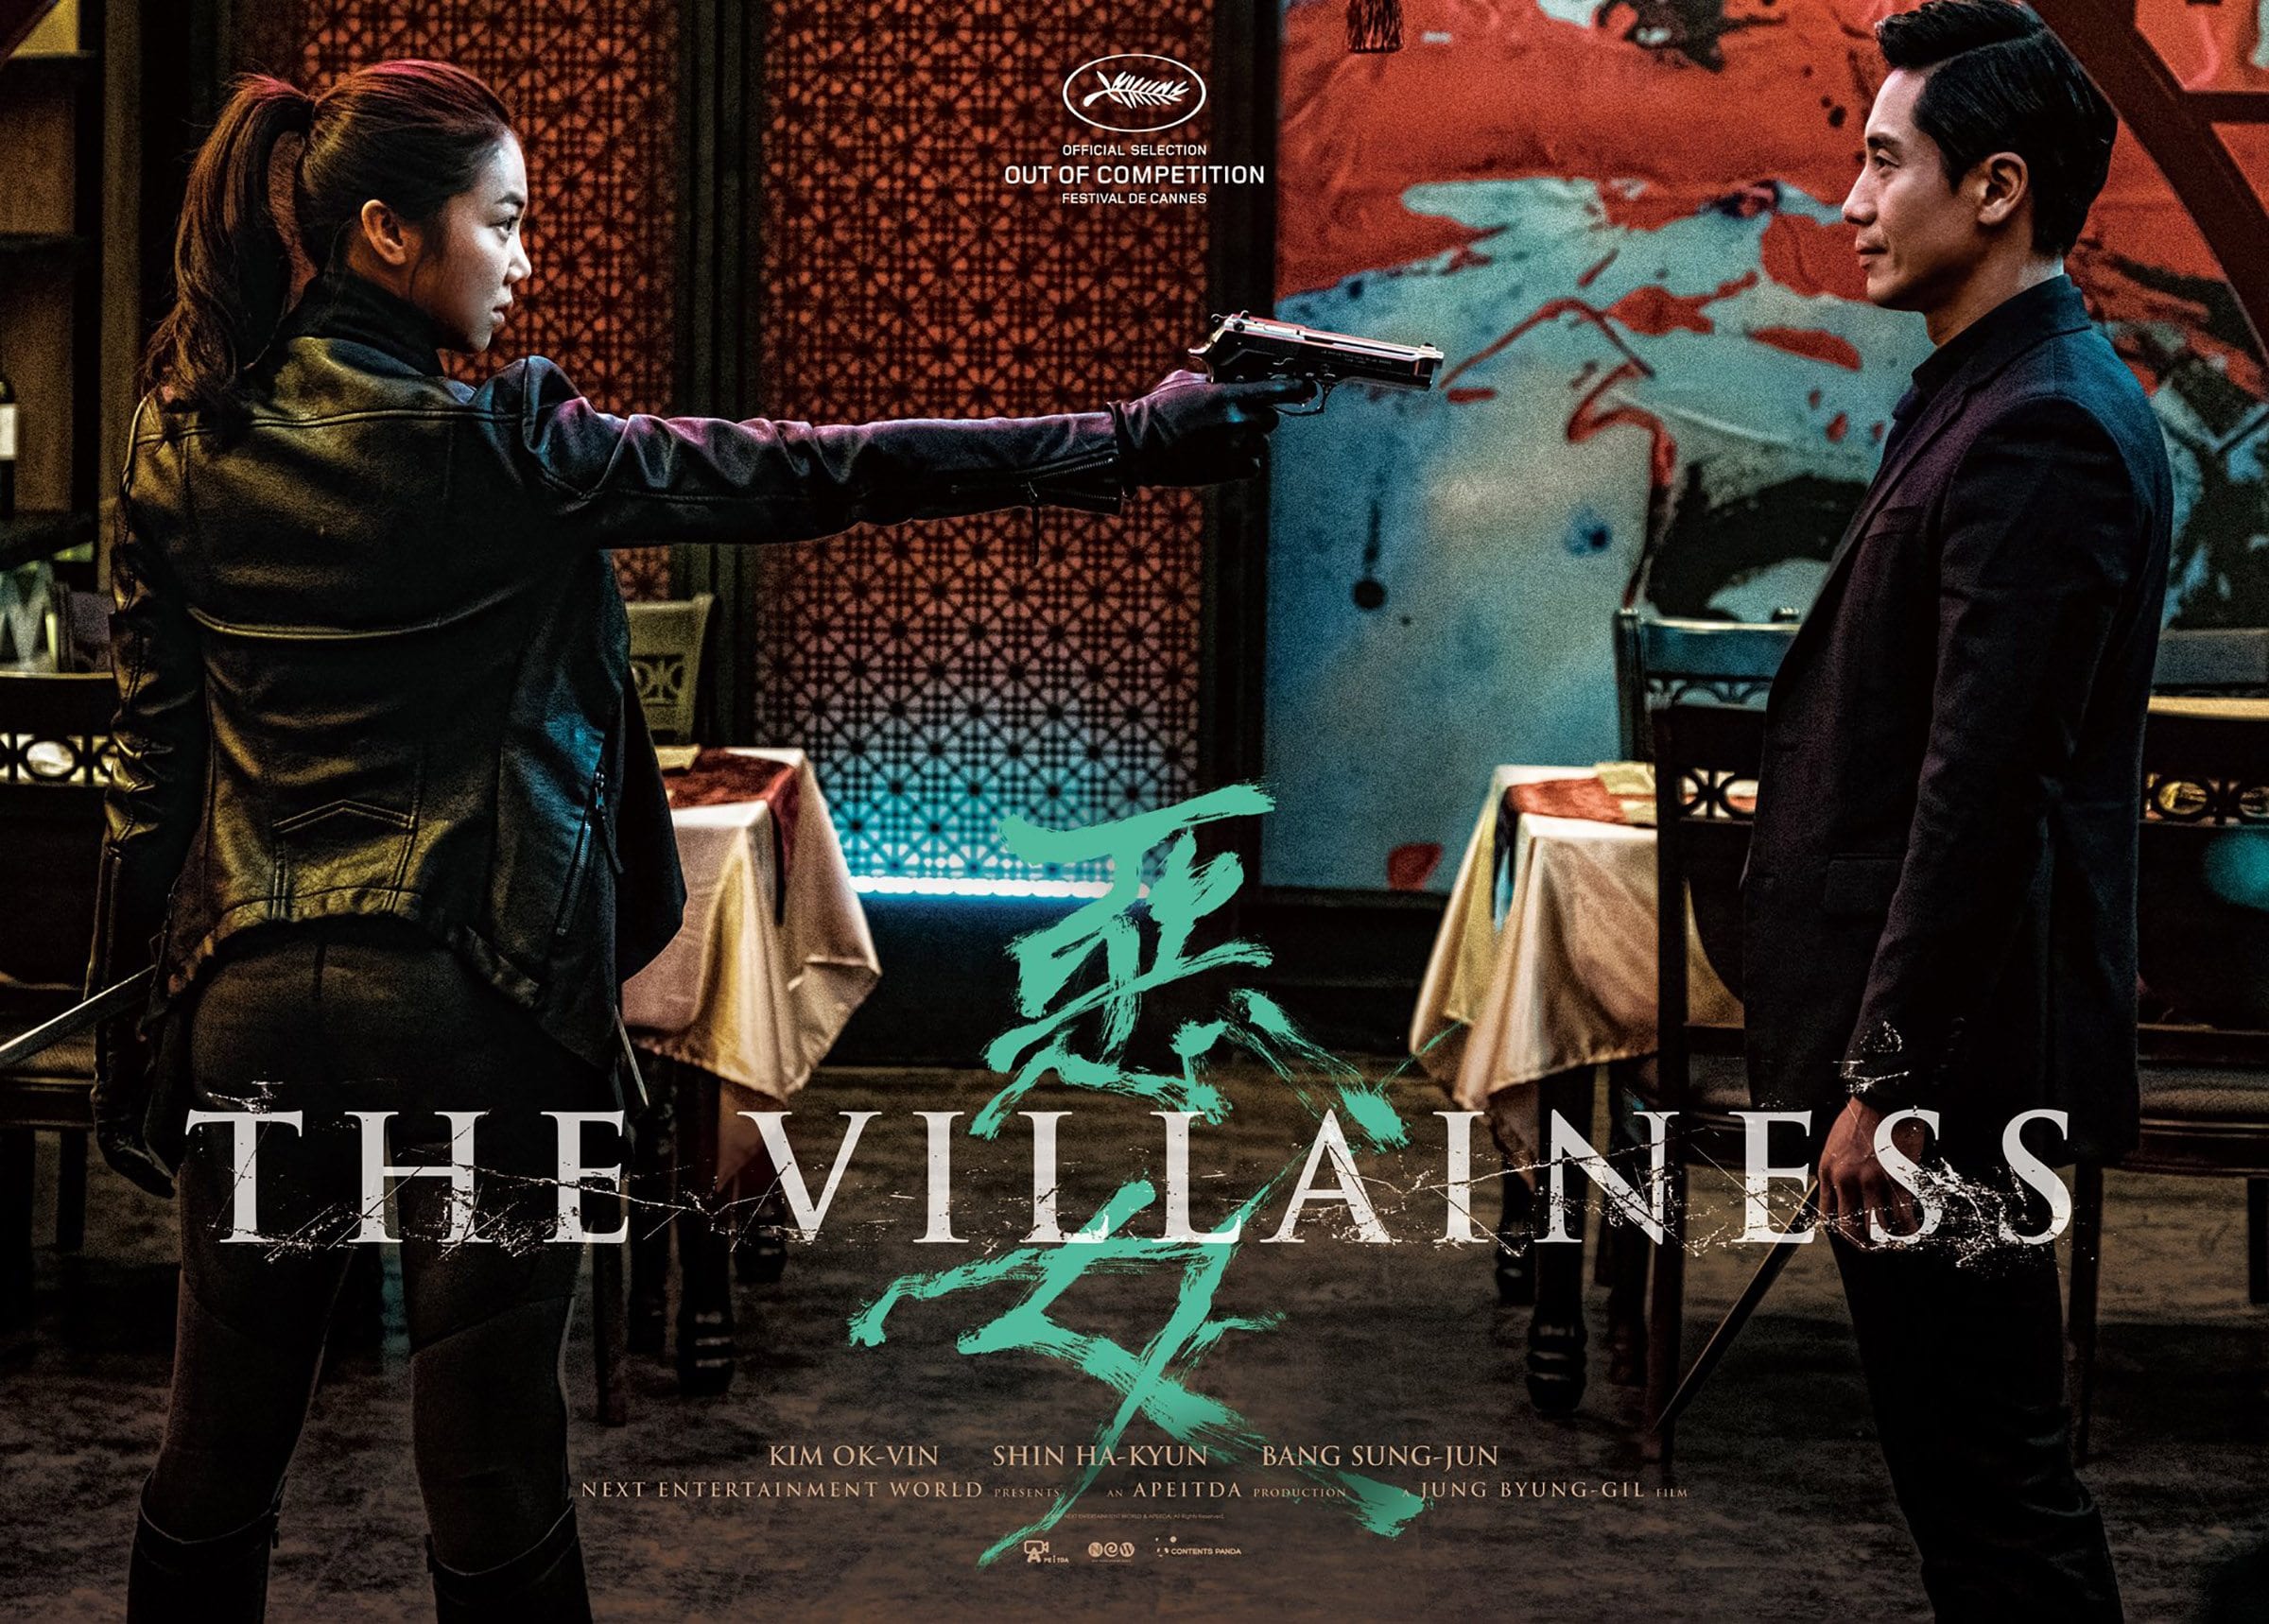 South Korean director Byung-gil Jung’s 'The Villainess' has been announced as the opening film for the 2017 Fantasia International Film Festival.